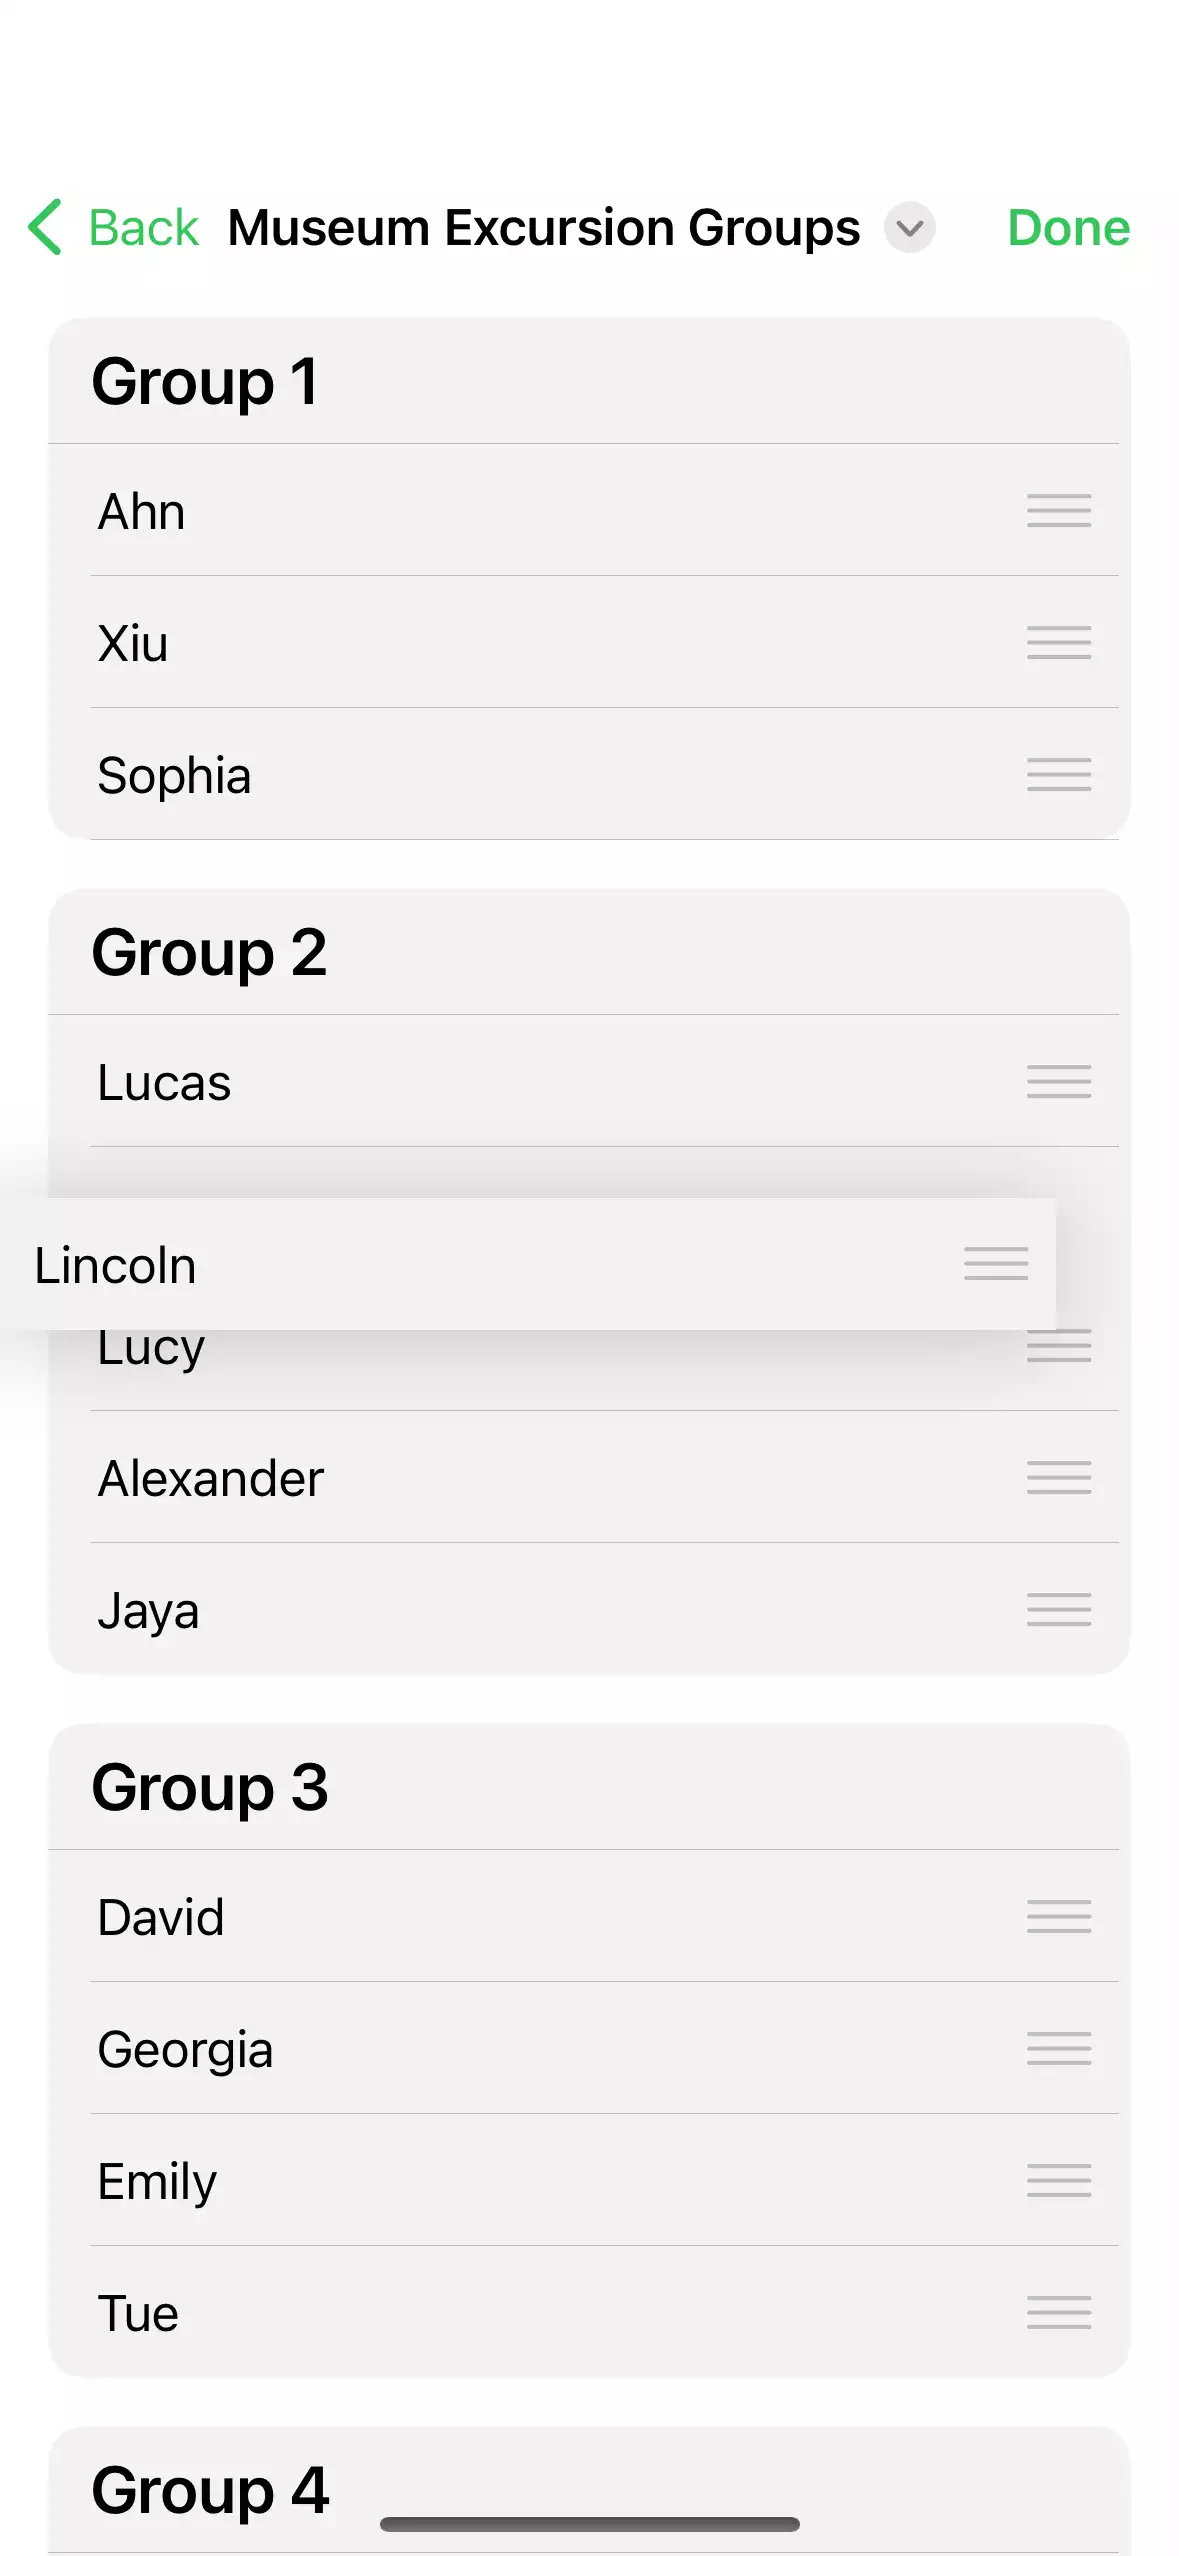 A list of groups, with a member of a group being rearranged.